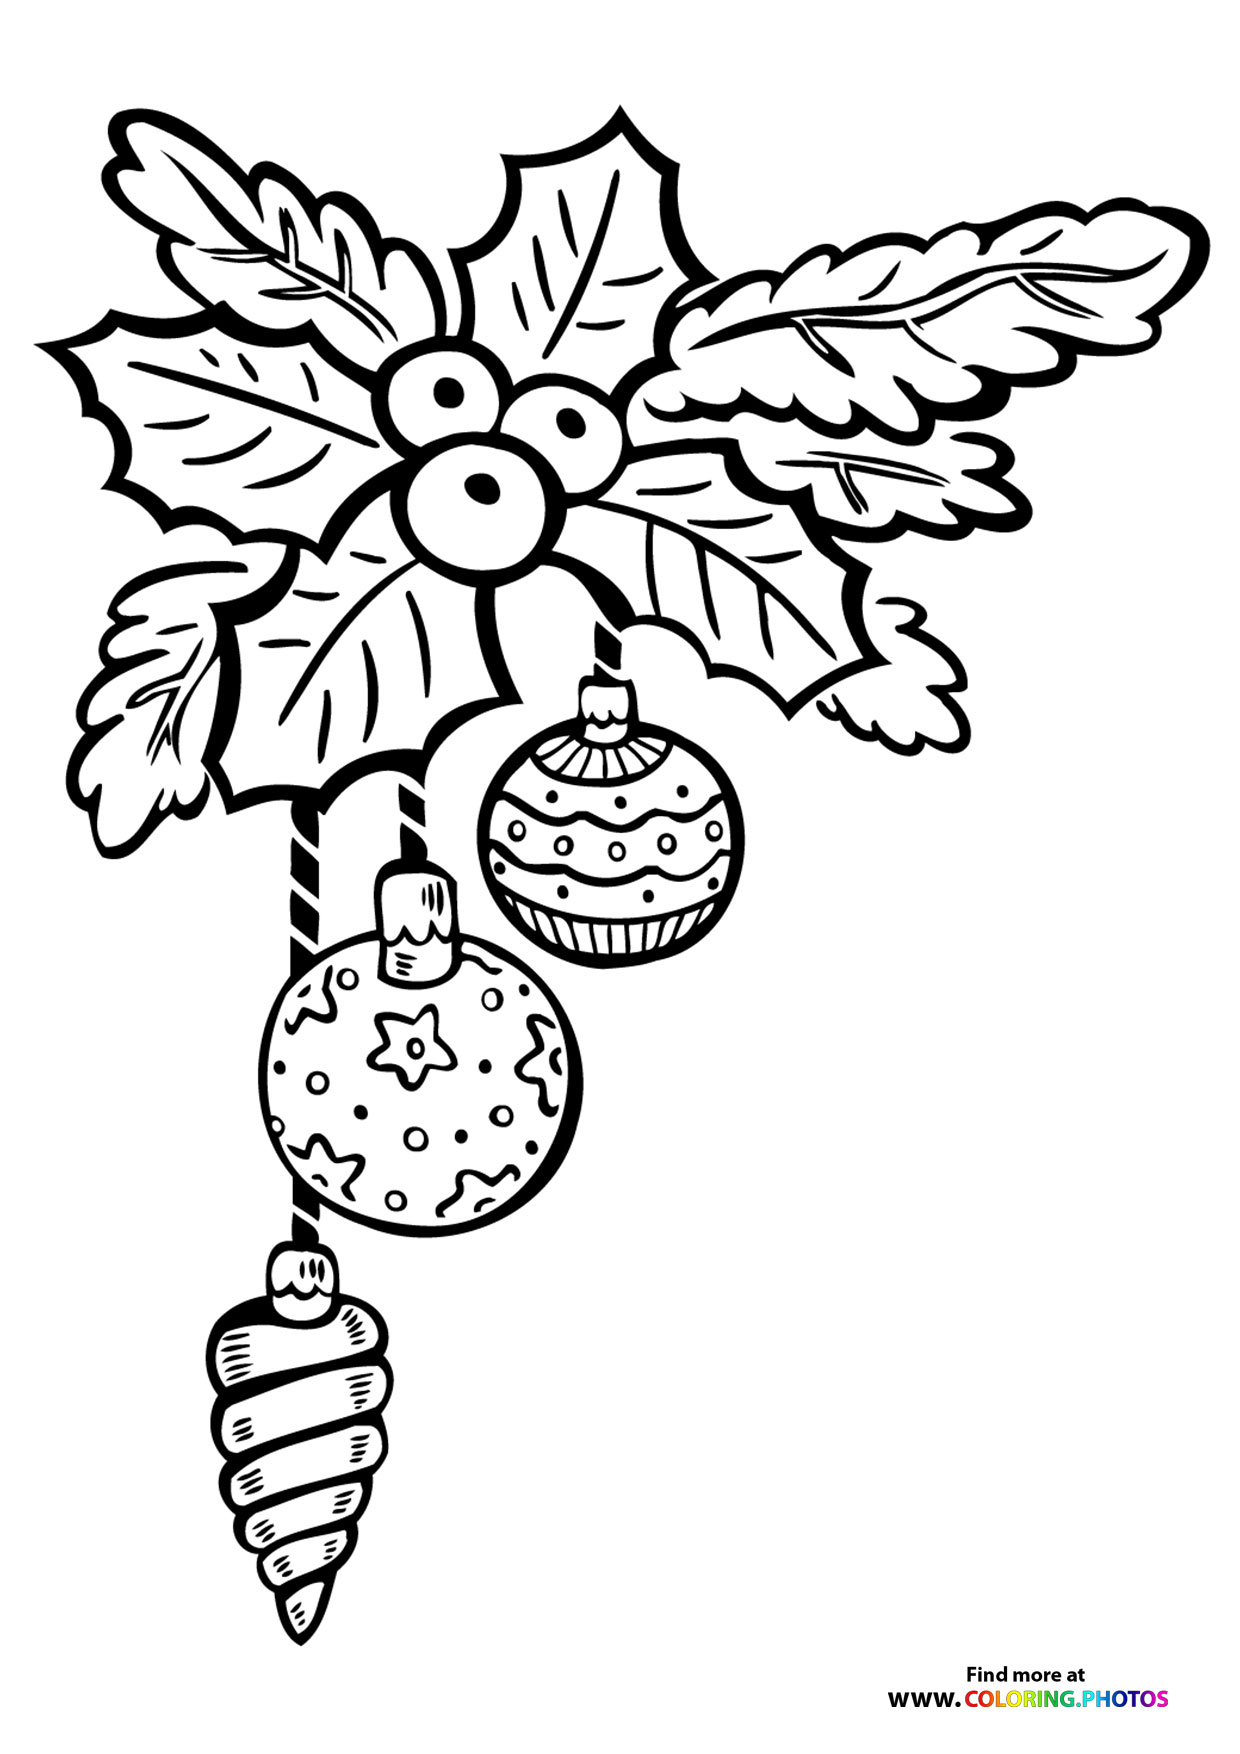 Christmas leaf ornament - Coloring Pages for kids